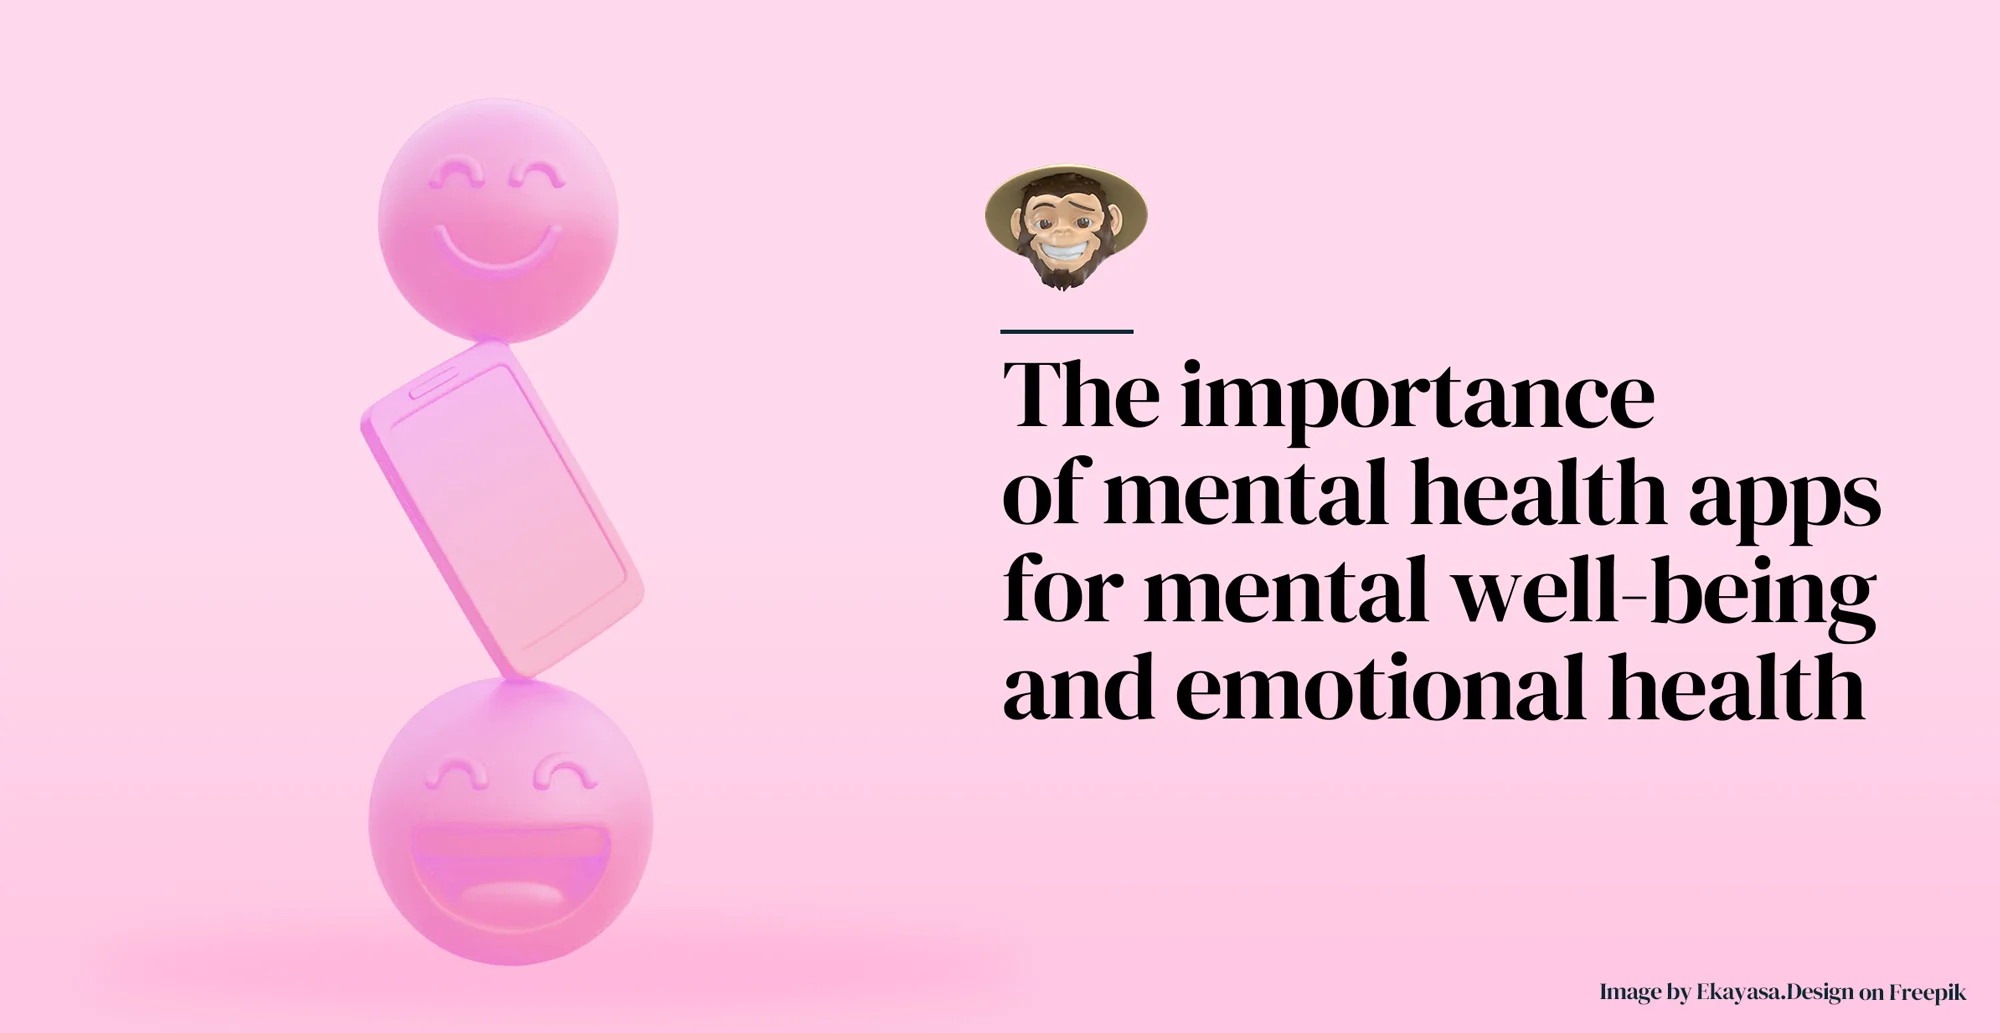 The importance of mental health apps for mental well-being and emotional health